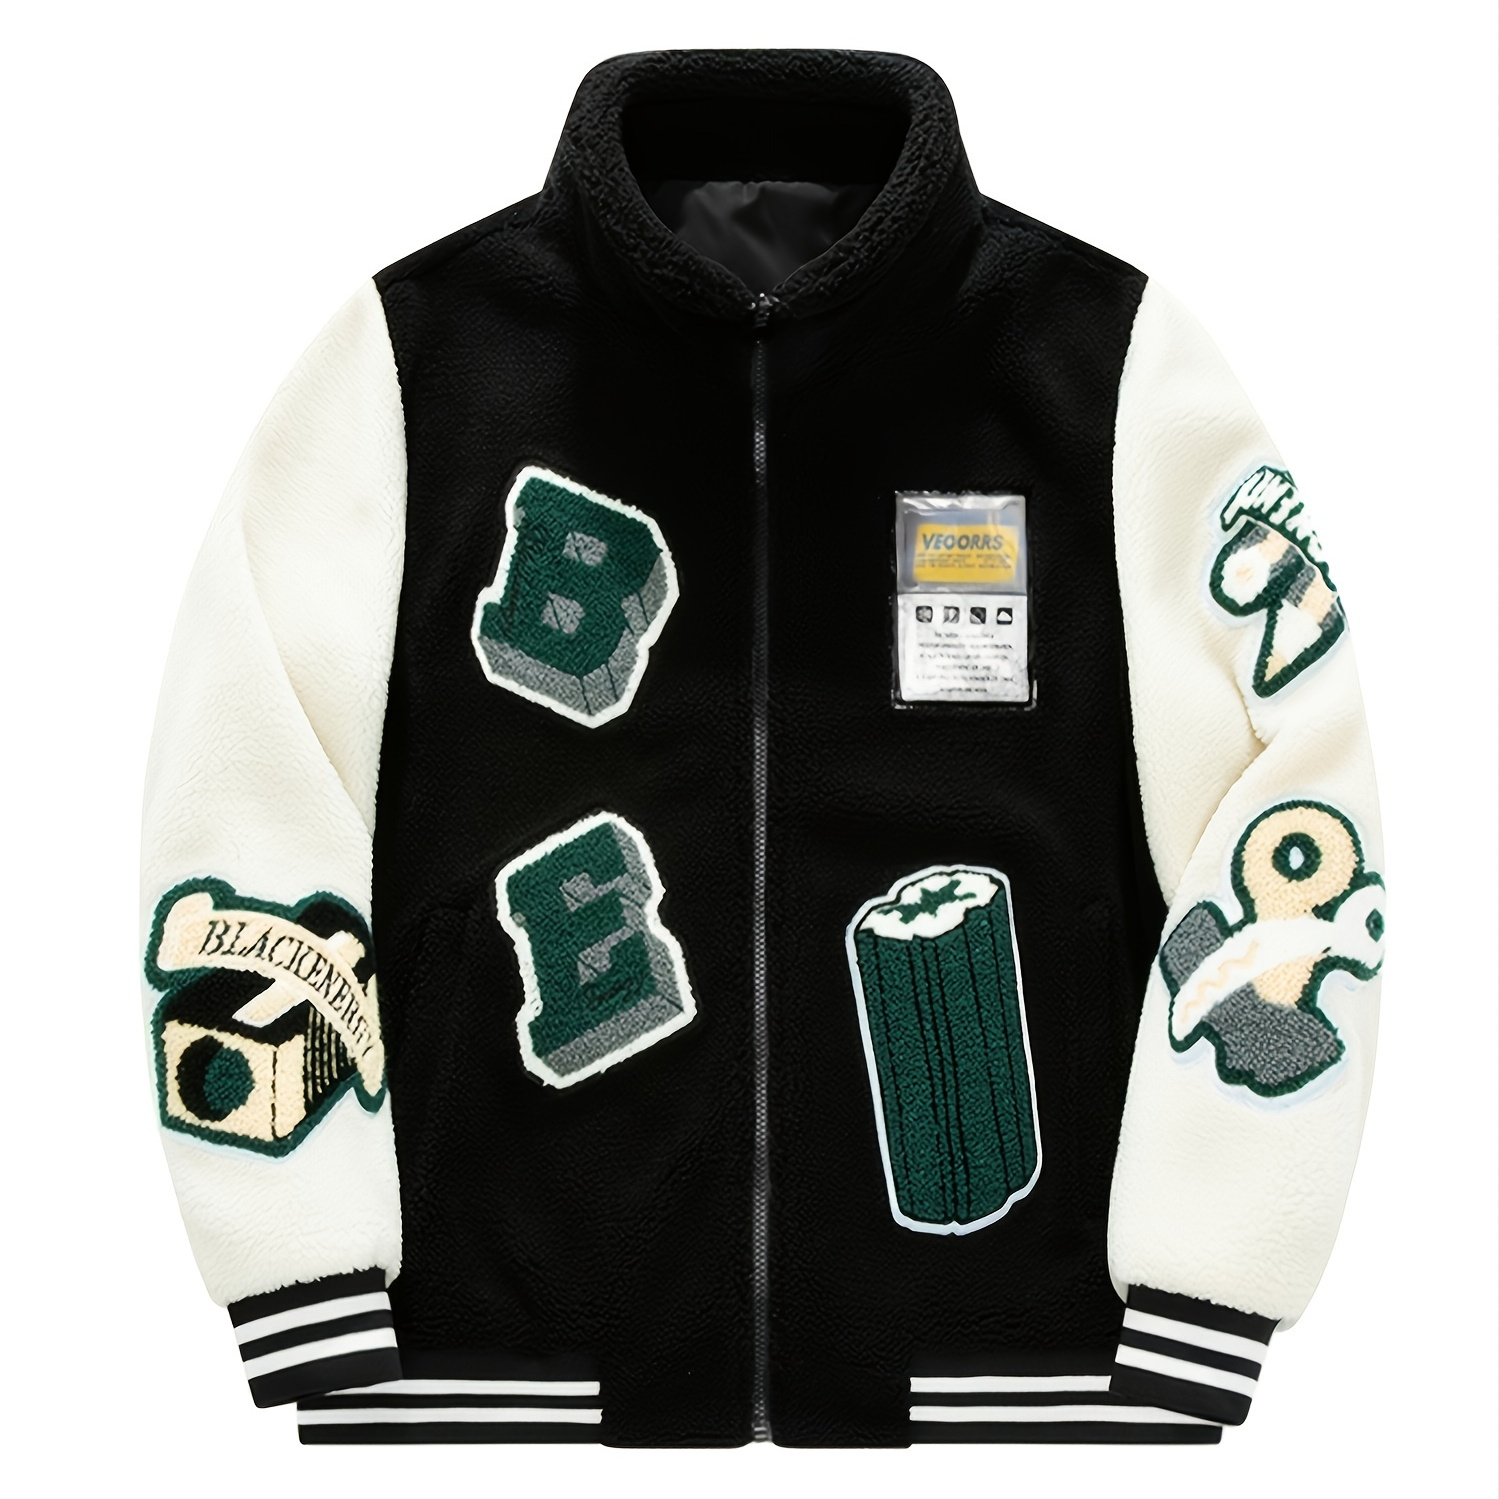 Men's Casual Fleece Color Block Jacket With Embroidered Patches